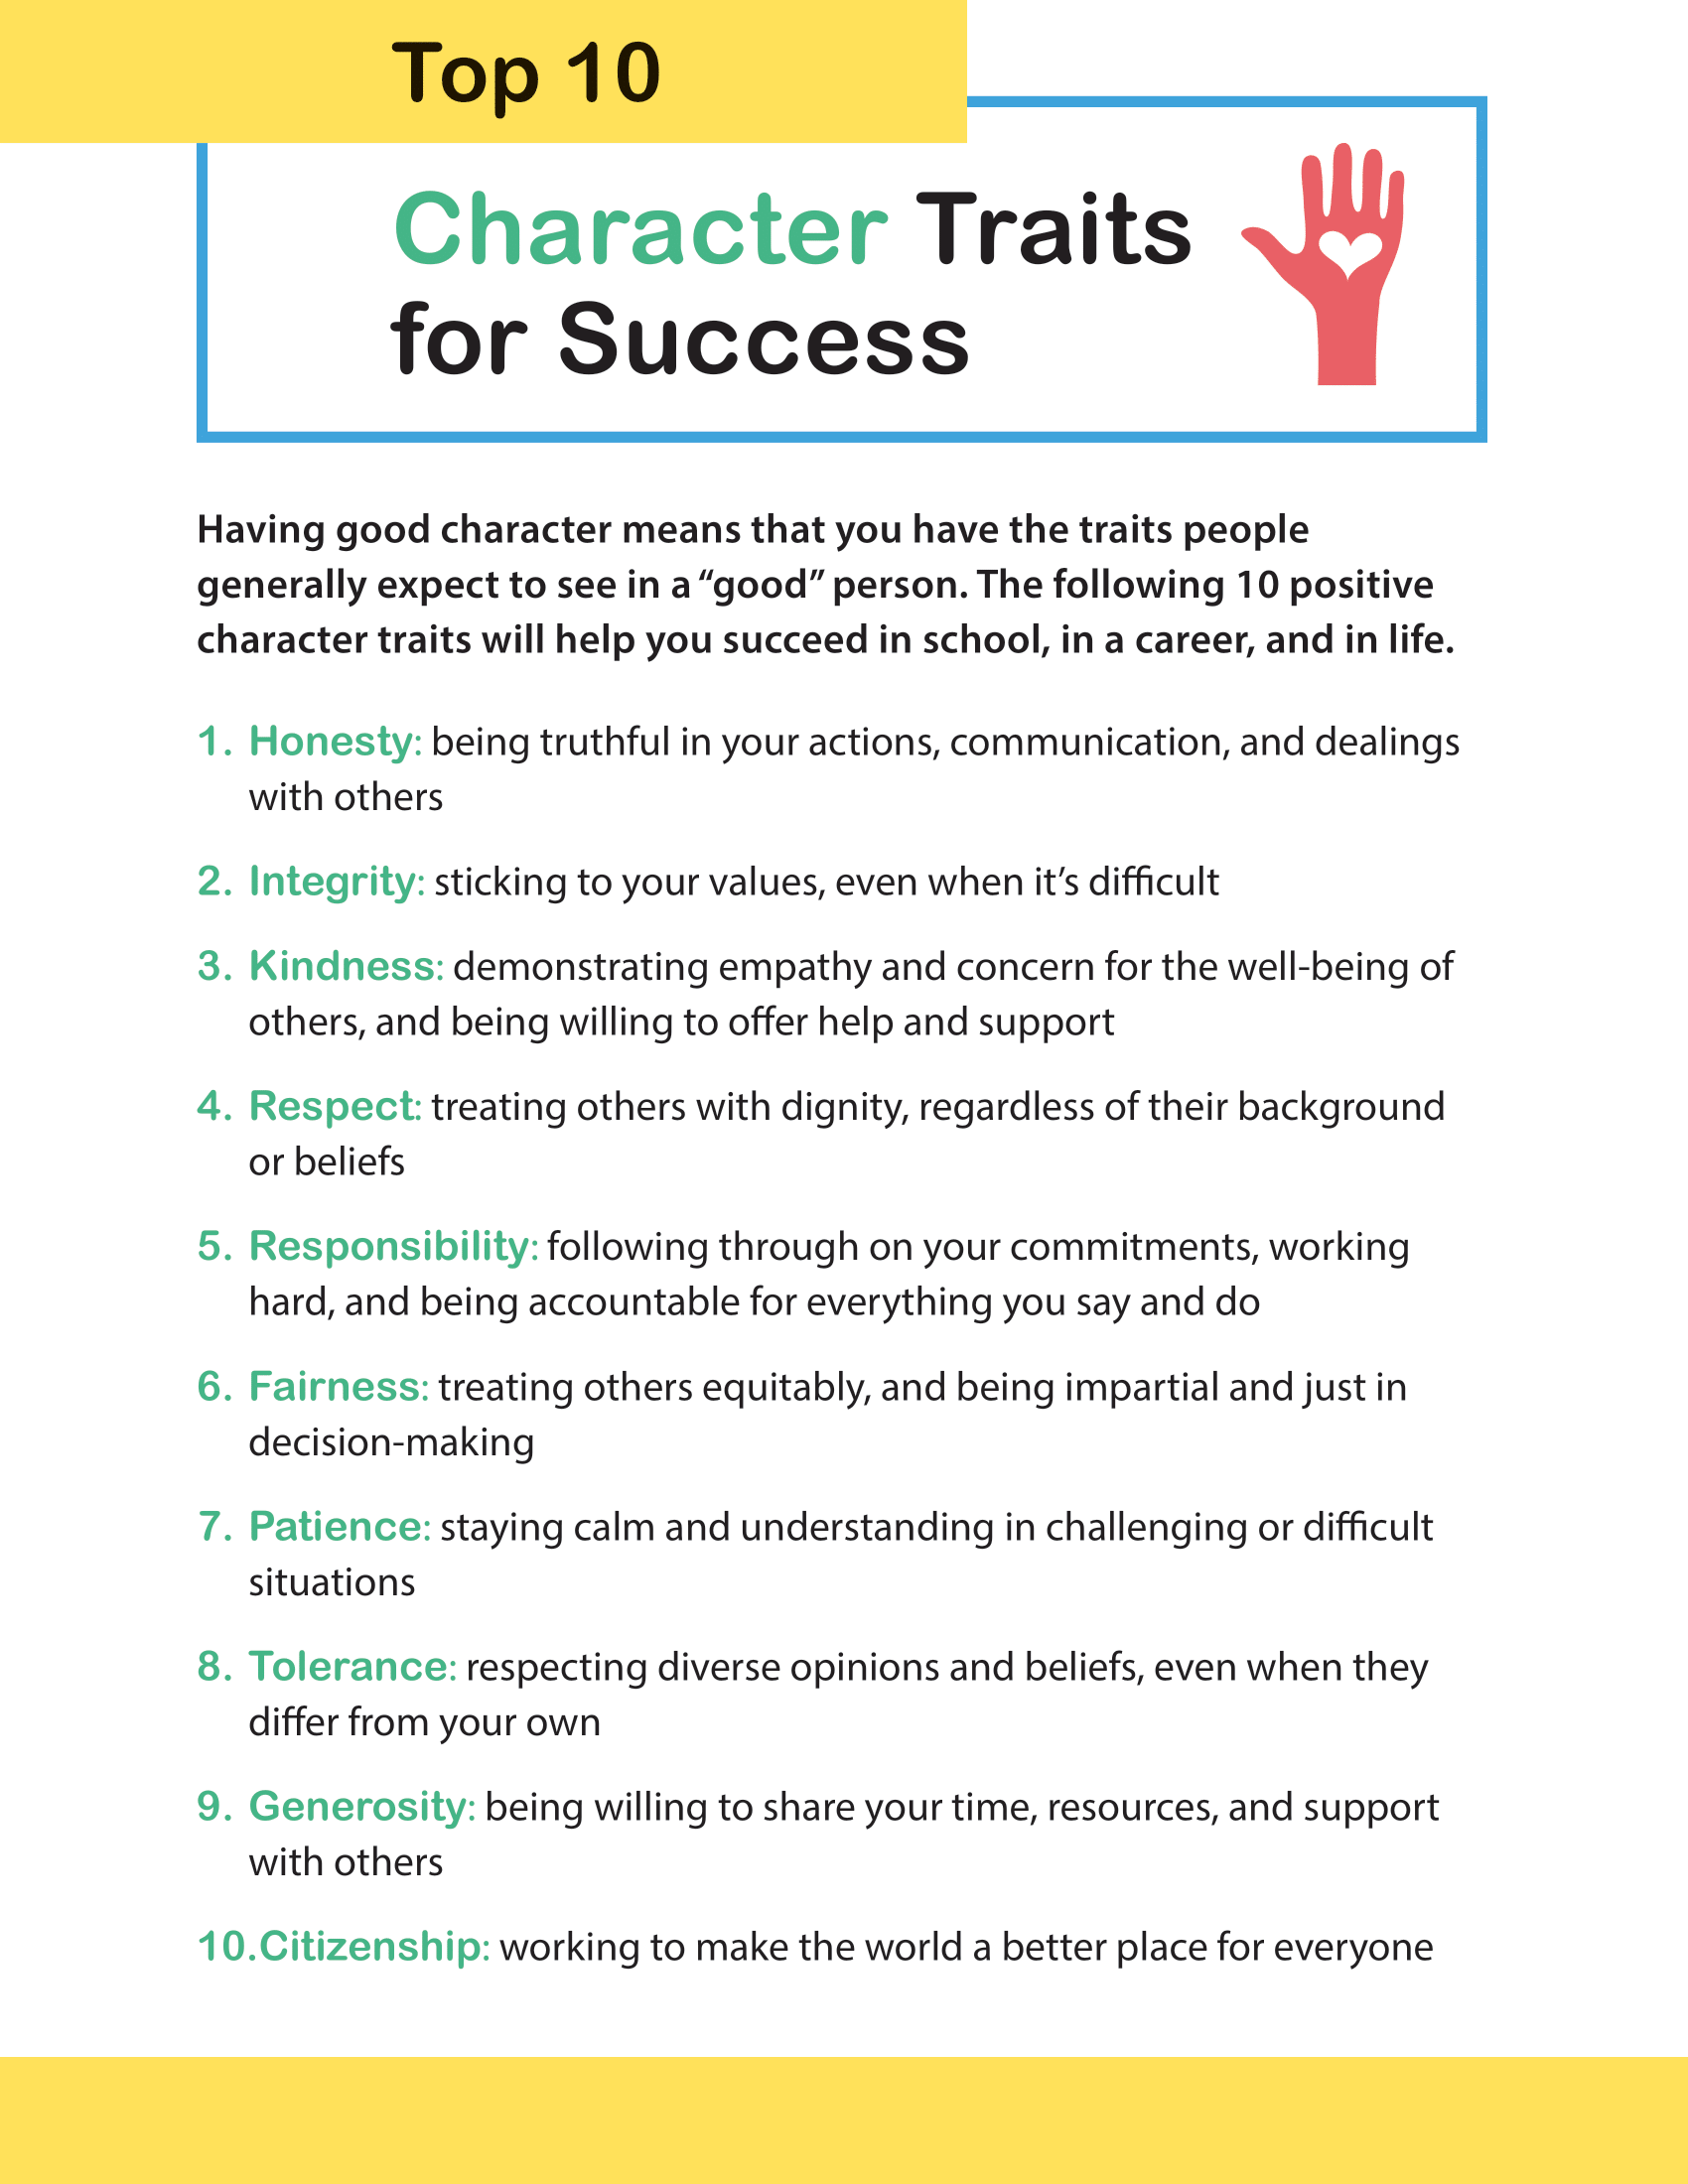 Top 10 Character Traits for Success